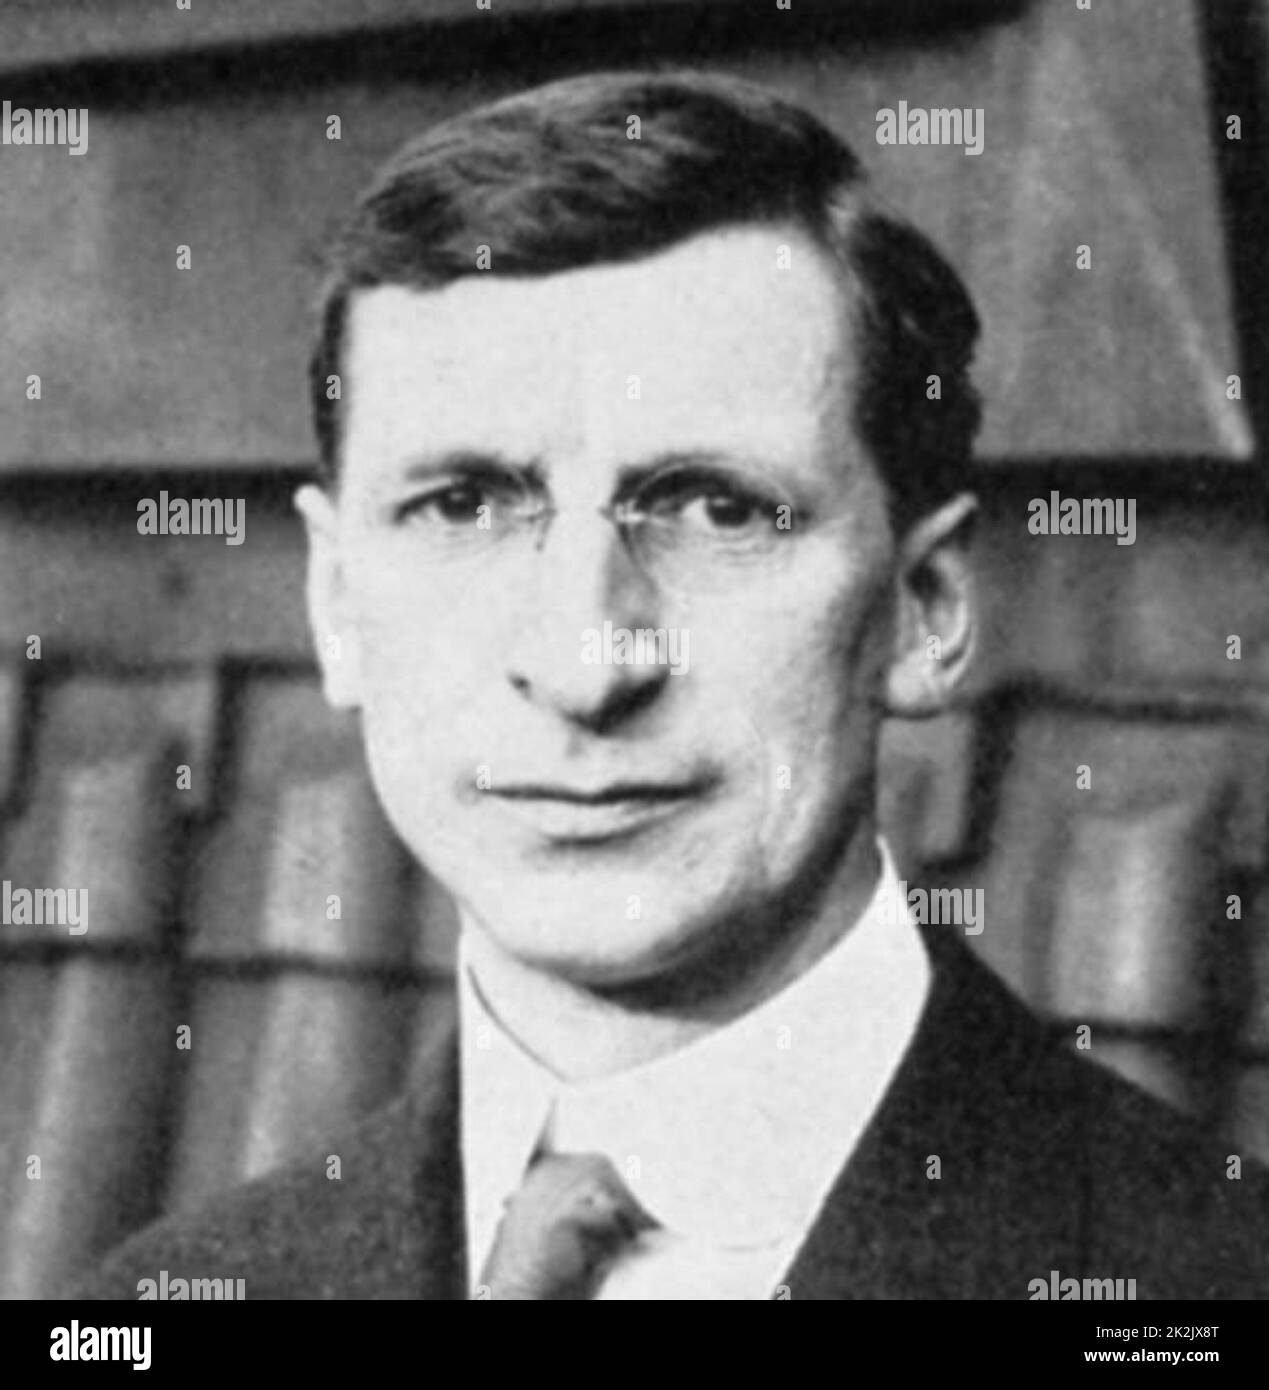 Eamon De Valera (1822-1975) American-born Irish statesman who, after fighting for Irish independence, became leader of Fianna Fail and served as Prime Minister of Ireland and was elected President in 1959. Half-tone. Black-and-white Stock Photo